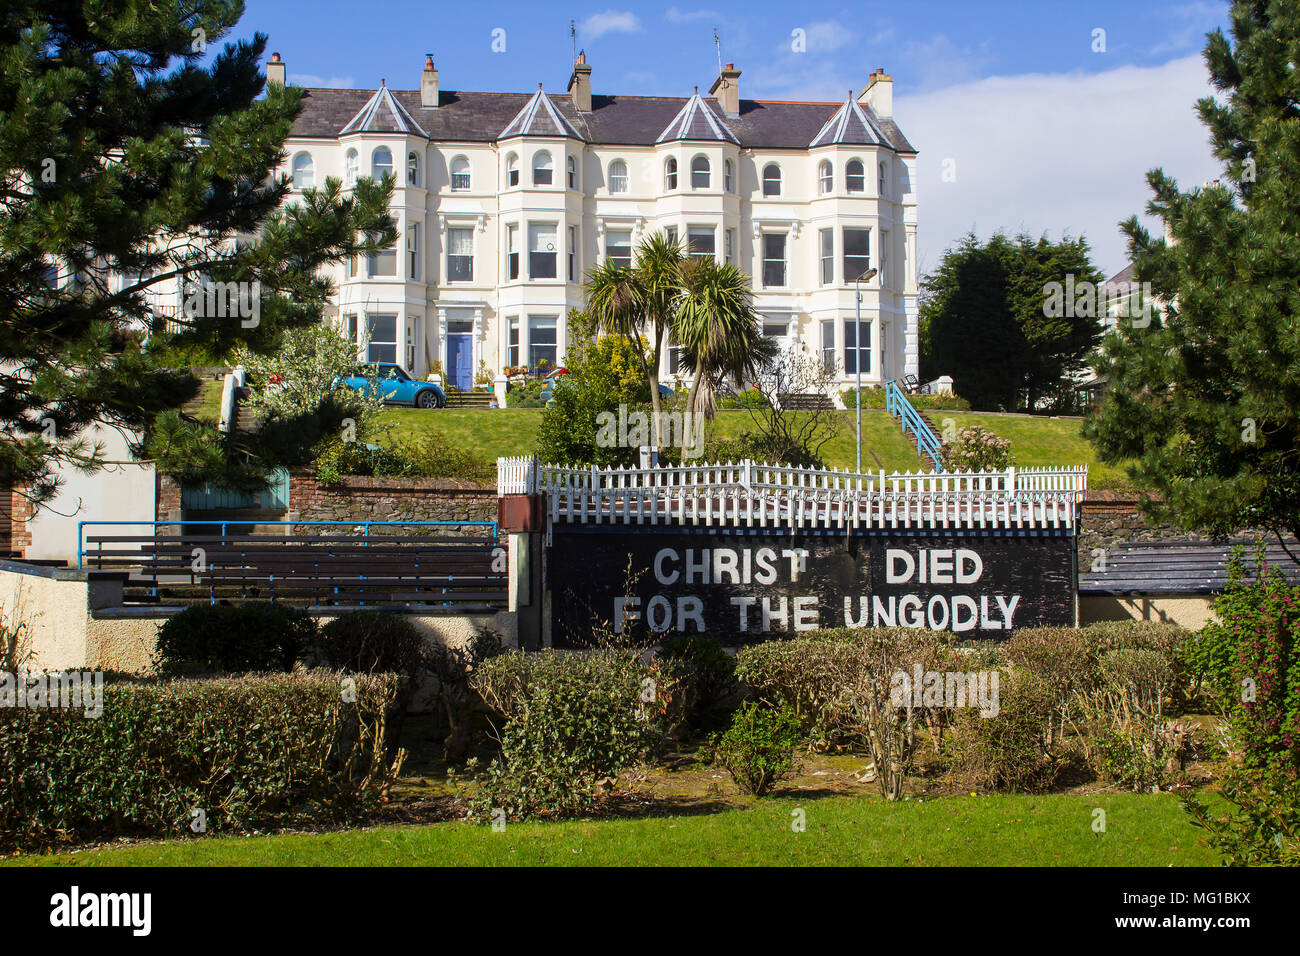 A scripture text on a wall of the historic Open air Congregational  Church in the Pickie area of Bangor Northern Ireland near to  the seafront, Stock Photo